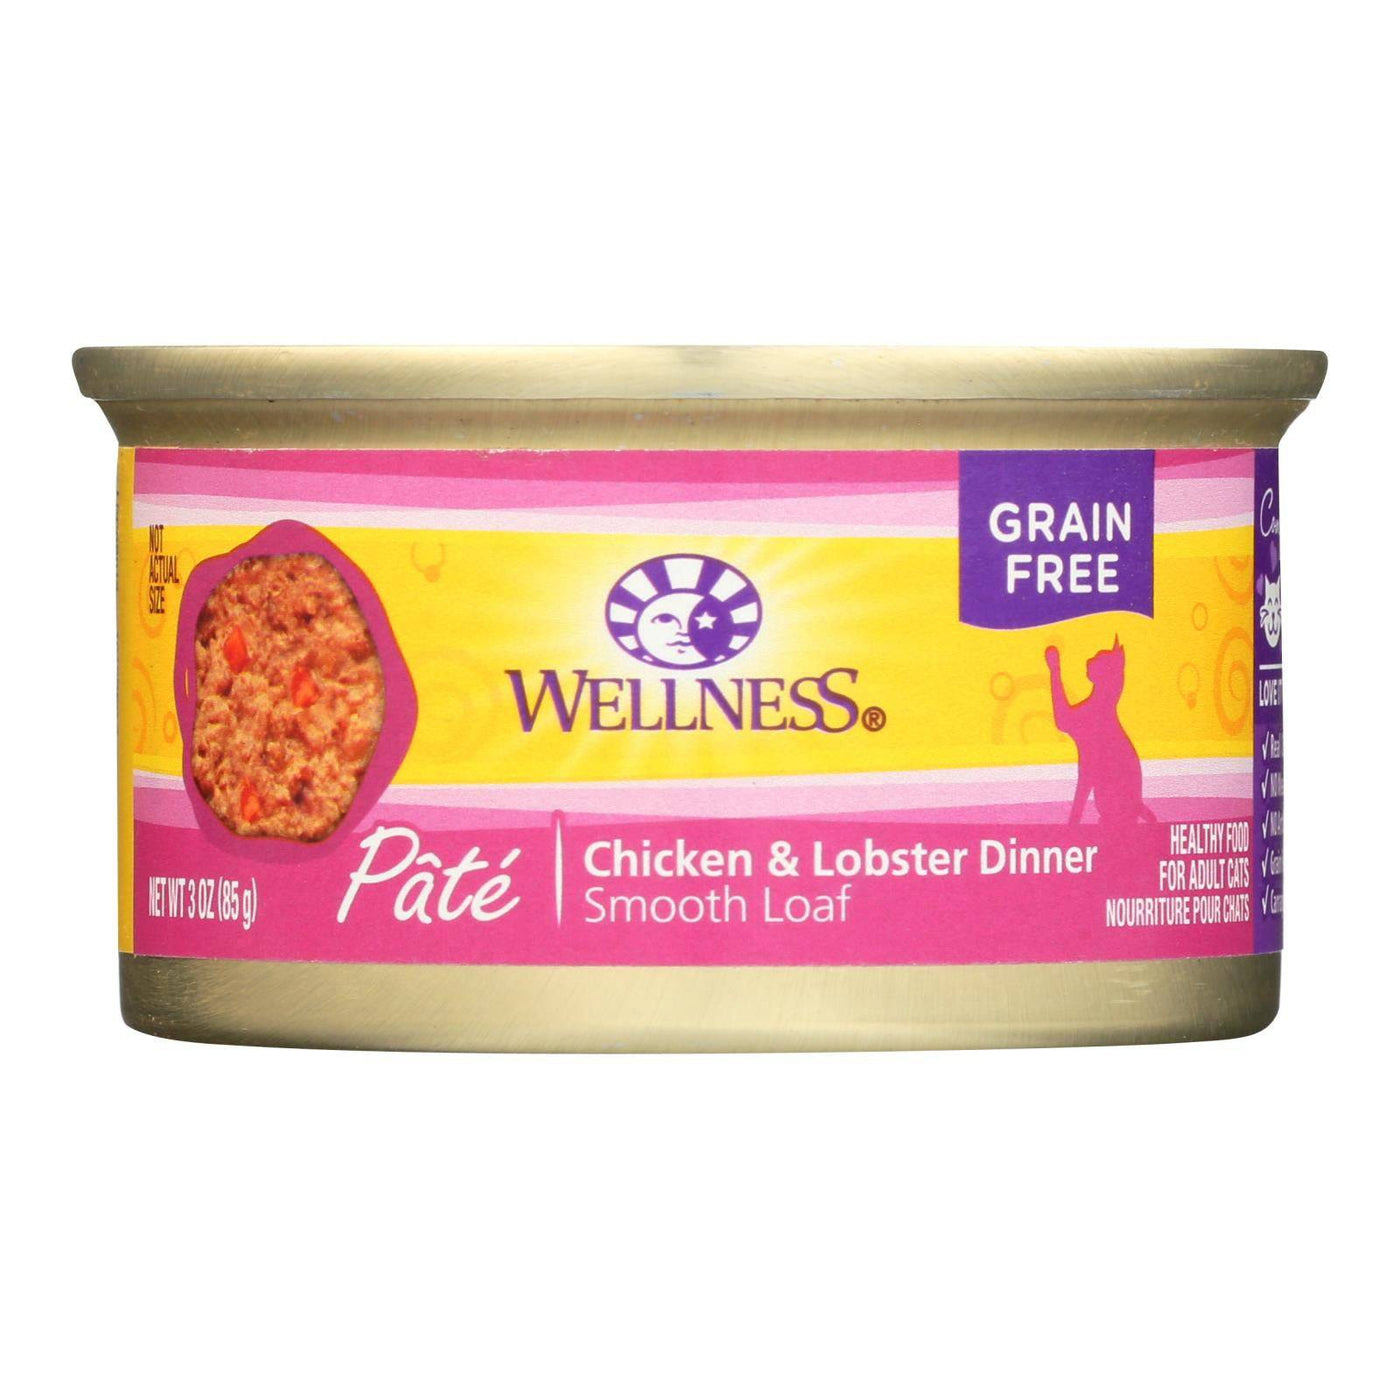 Buy Wellness Pet Products Cat Food - Chicken And Lobster - Case Of 24 - 3 Oz.  at OnlyNaturals.us